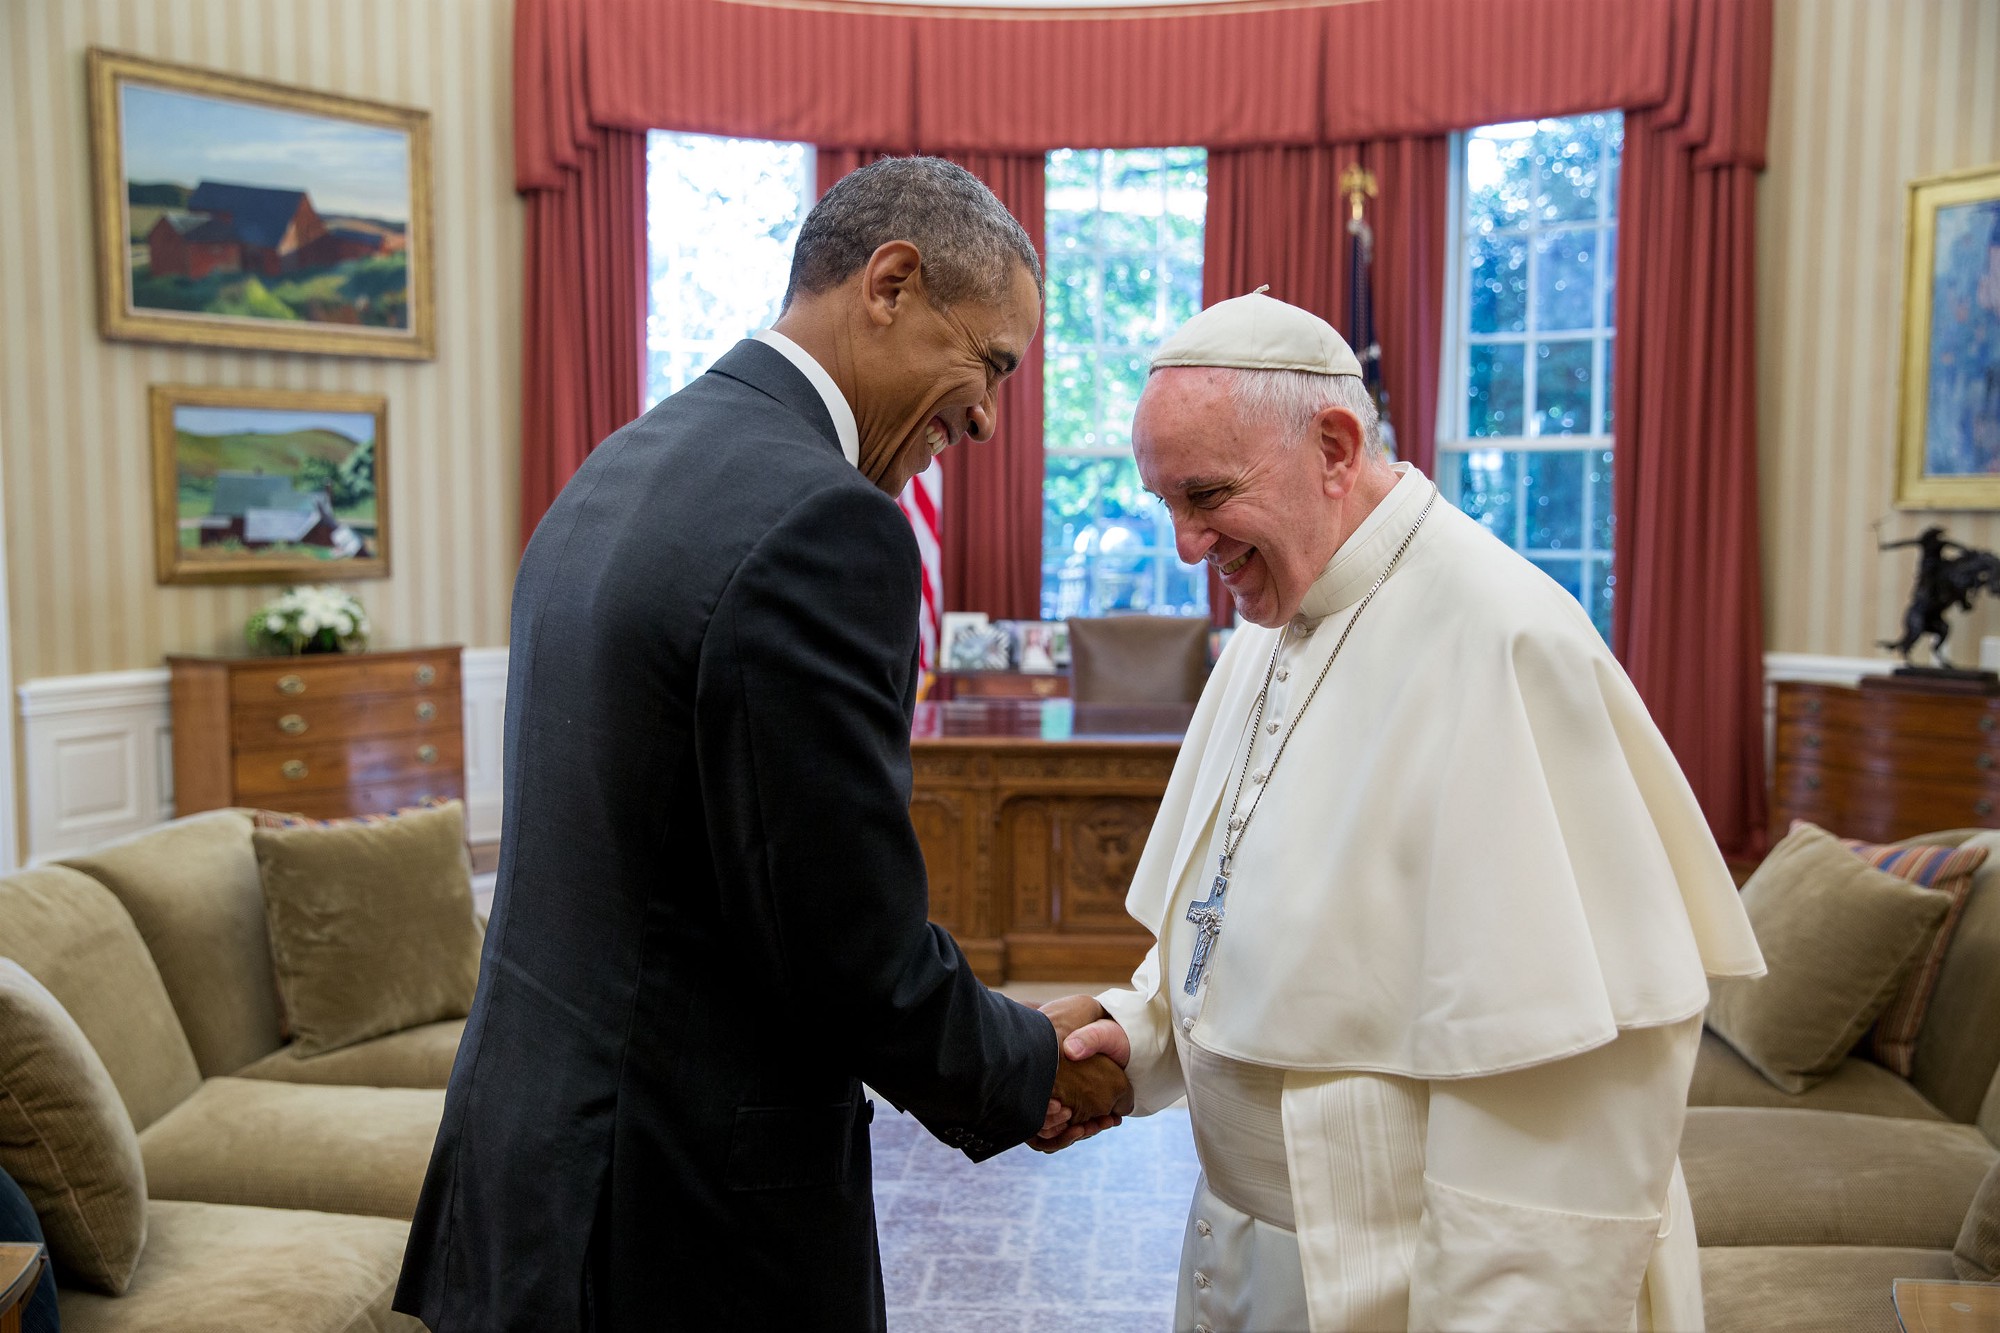 The President and Pope Francis conclude their meeting. (Official White House Photo by Pete Souza)